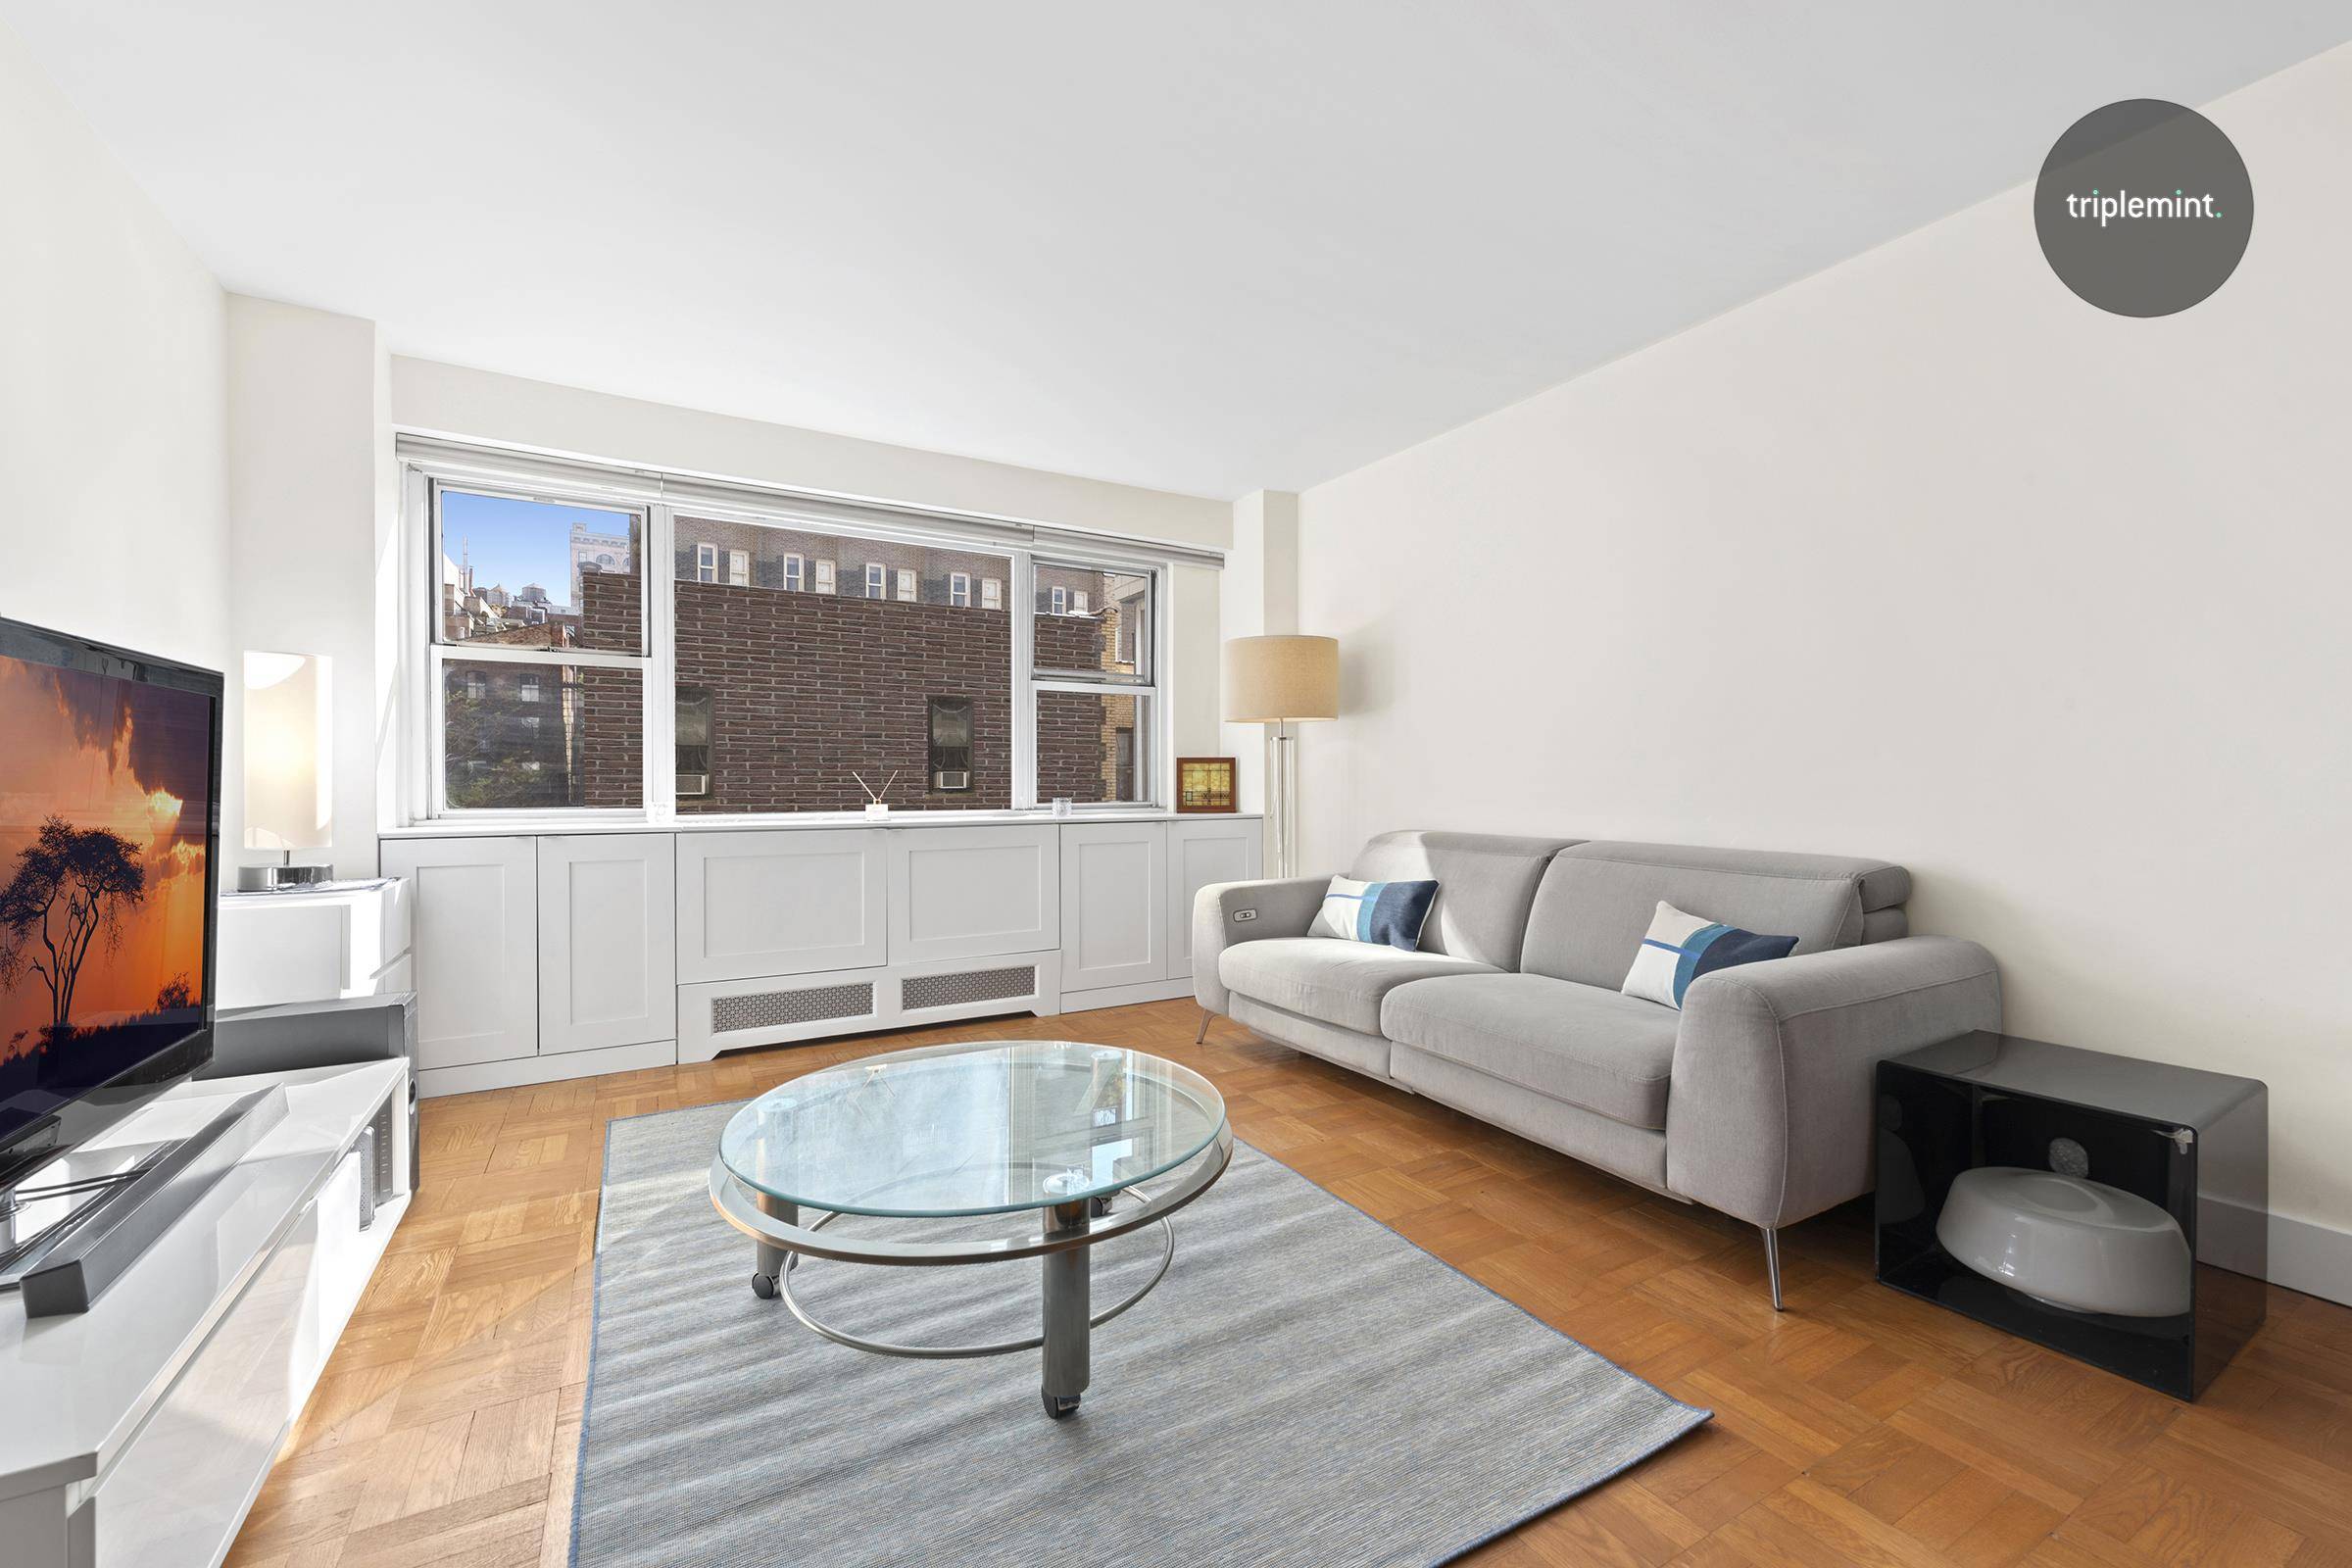 Impeccable renovation meets ideal Greenwich Village location Welcome home to apartment 7G at the Lawrence House.